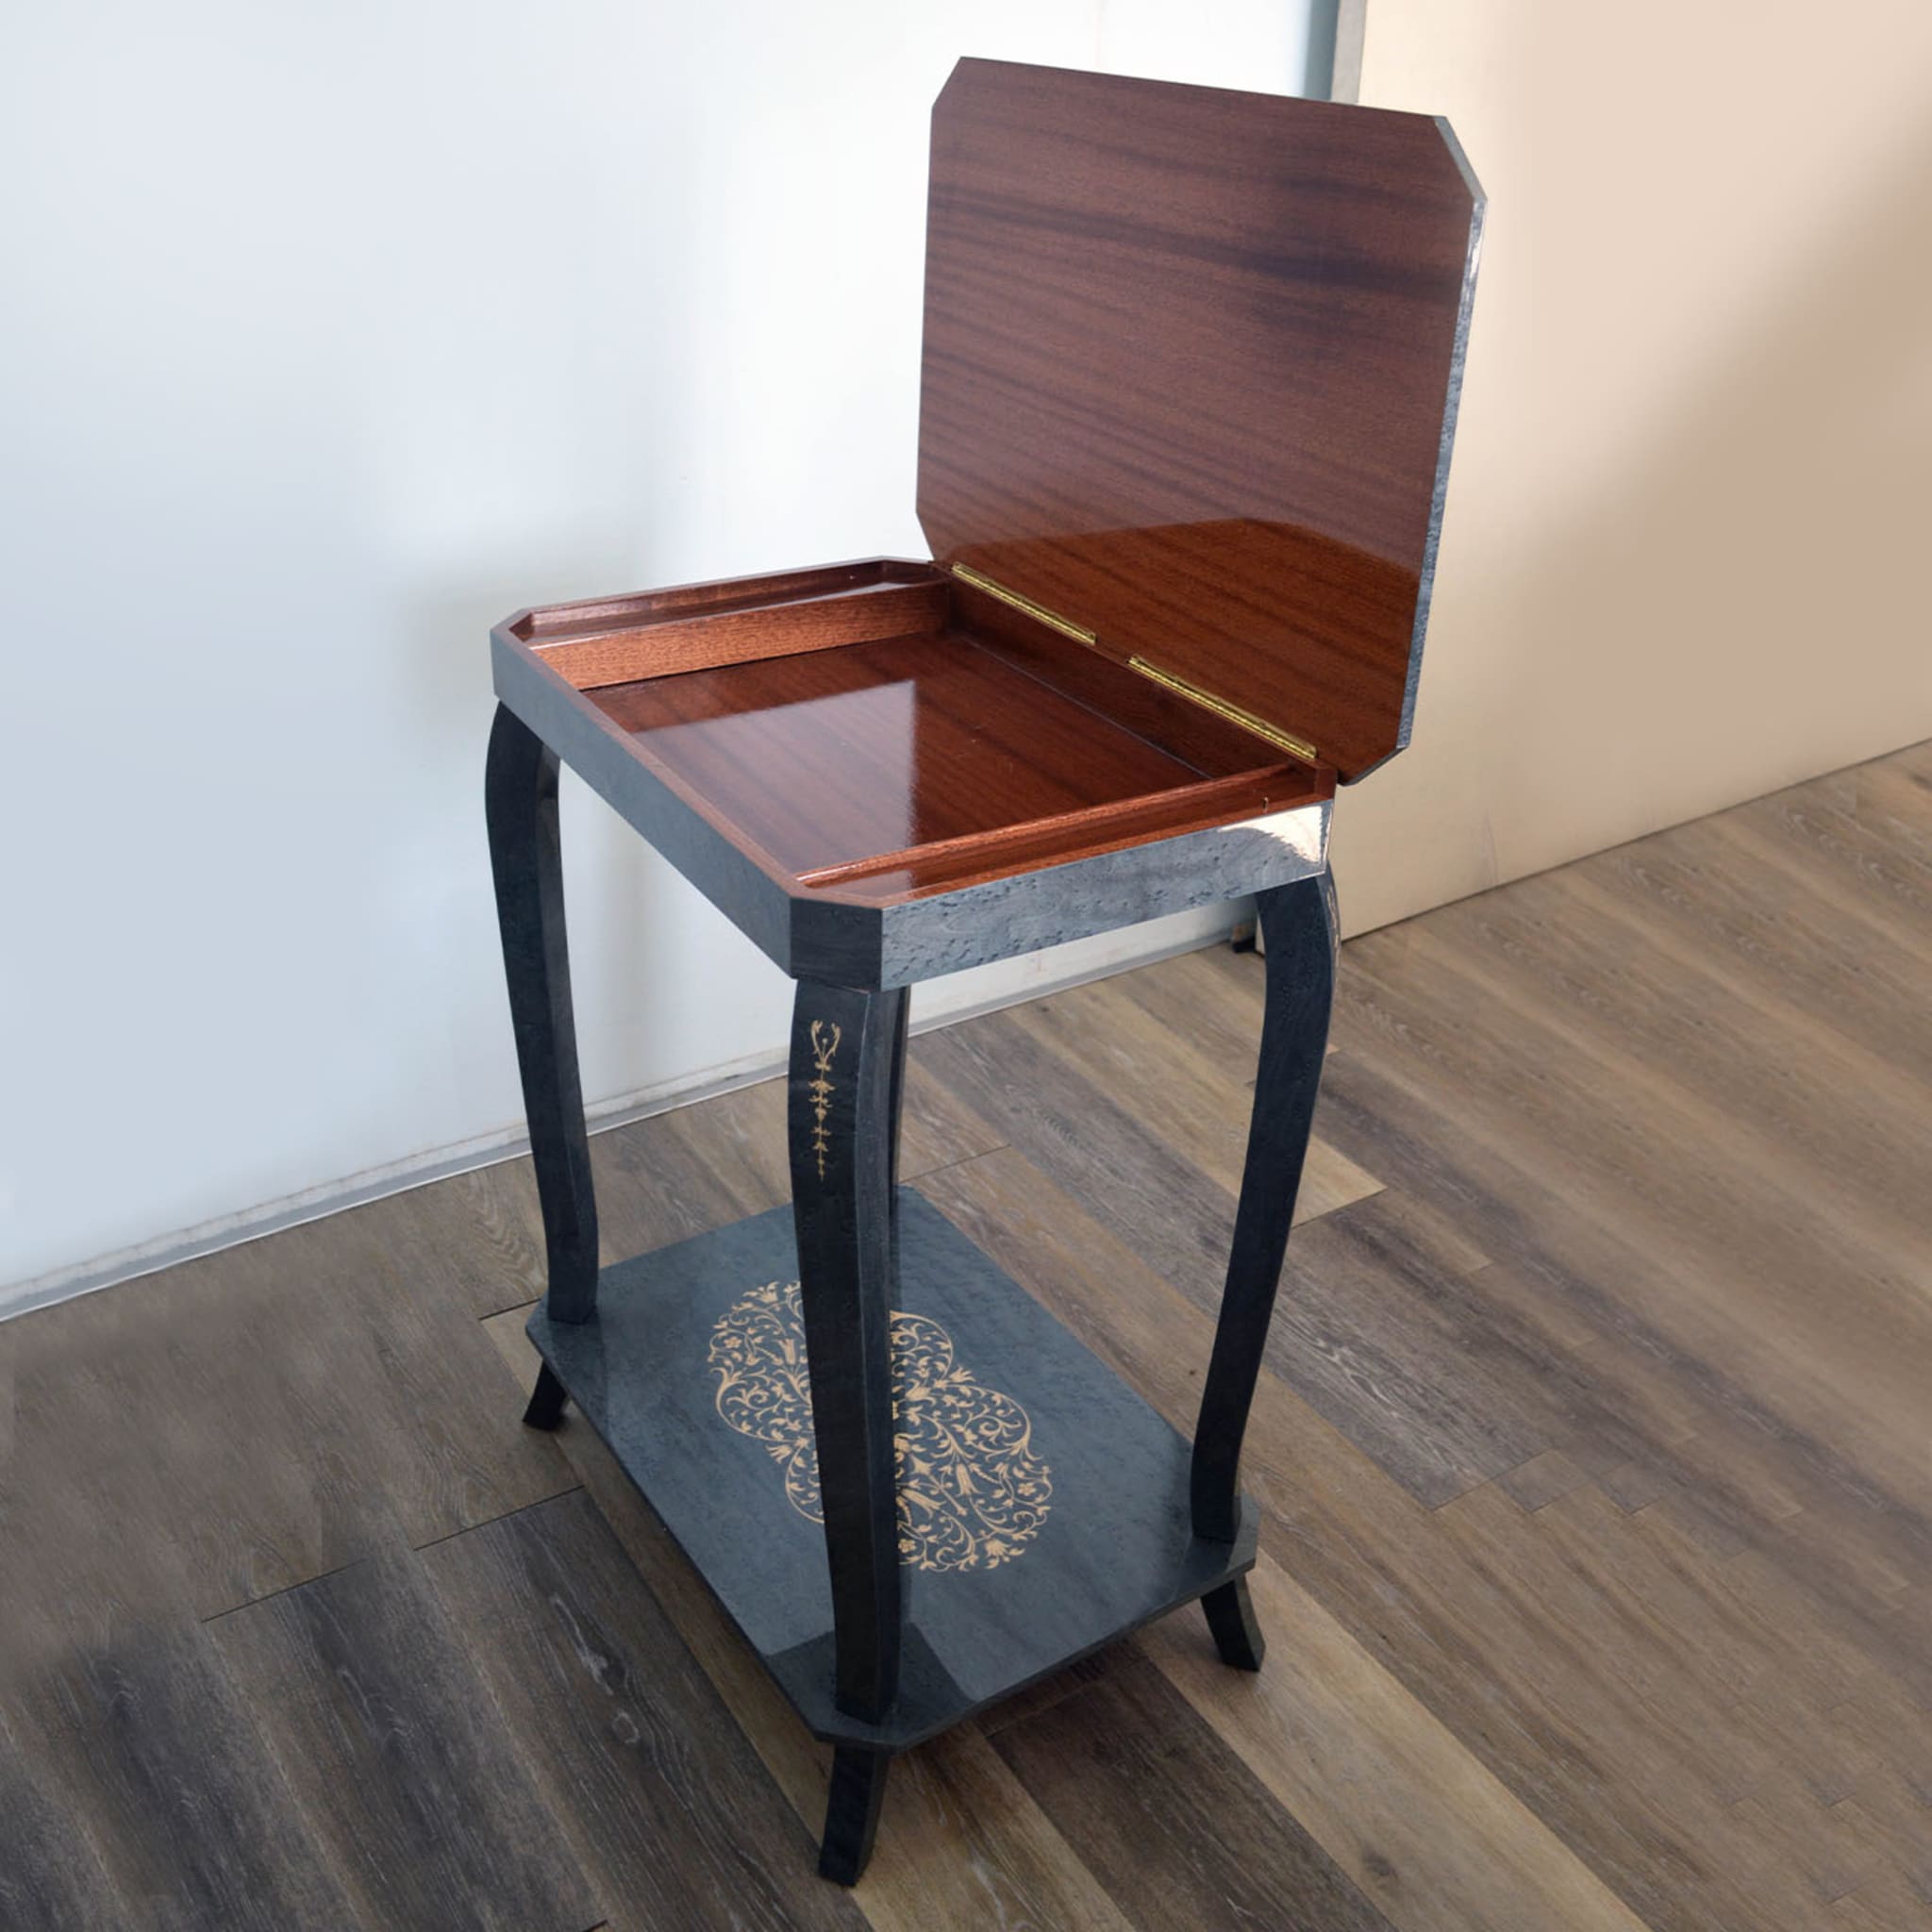 Musical Birdseye Maple Side Table with Storage Unit - Alternative view 2